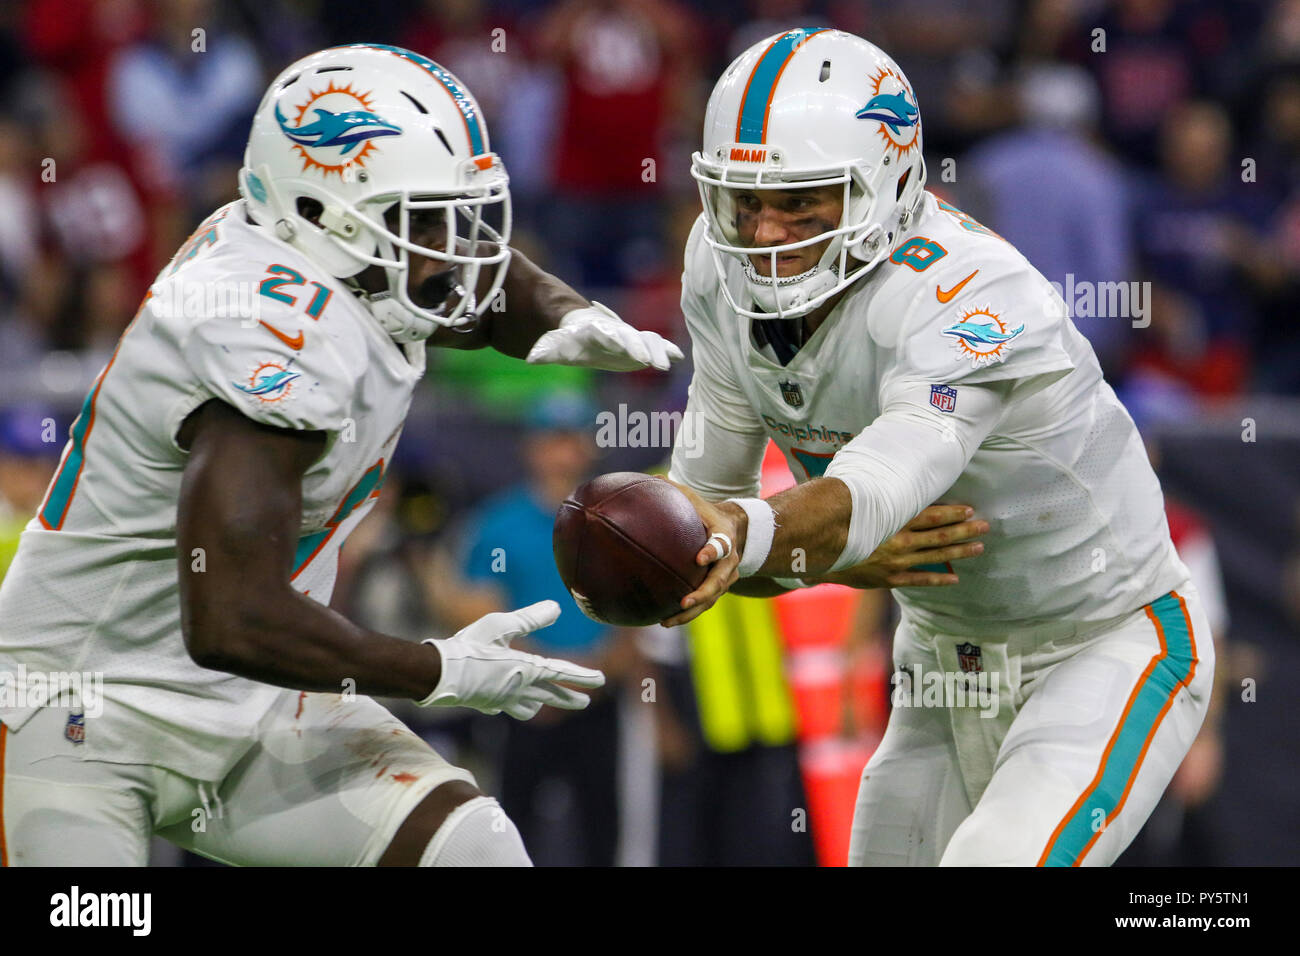 Houston, TX, USA. 25th Oct, 2018. Miami Dolphins quarterback Brock Osweiler (8) hands the ball off to running back Frank Gore (21) during the third quarter at NRG Stadium in Houston, TX. John Glaser/CSM/Alamy Live News Stock Photo